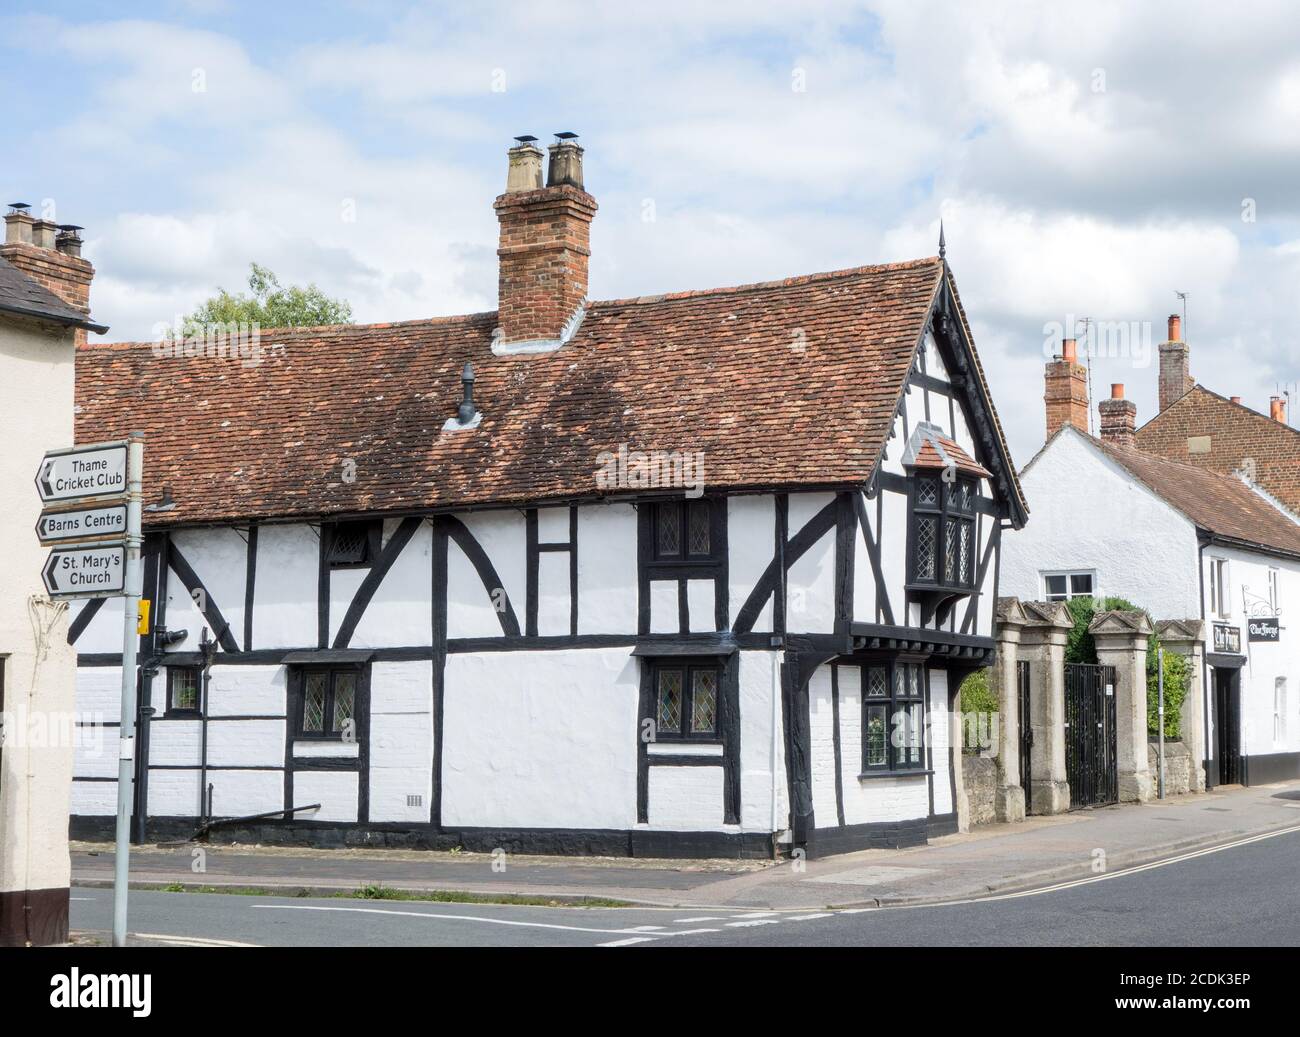 Black and white half timbered alms houses in the Oxfordshire market town of Thame Stock Photo